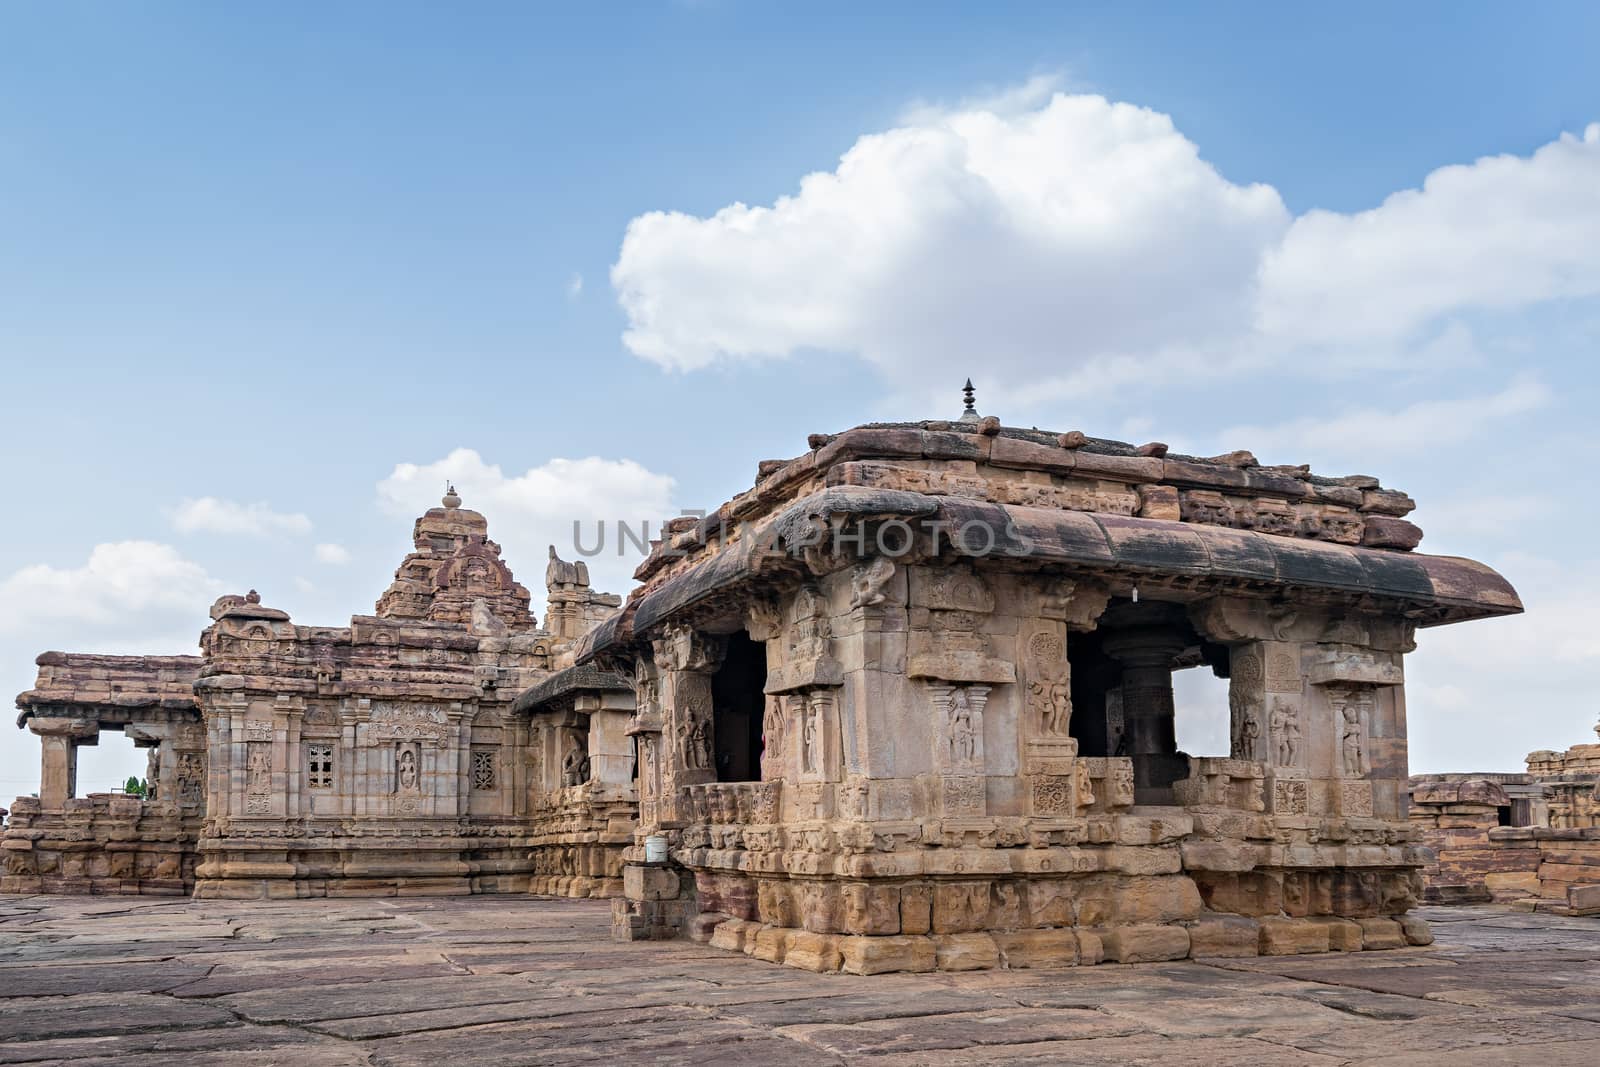 Virupaksha Temple, built by the Queen of Vikaramaditya II in about A.D.740 . by lalam